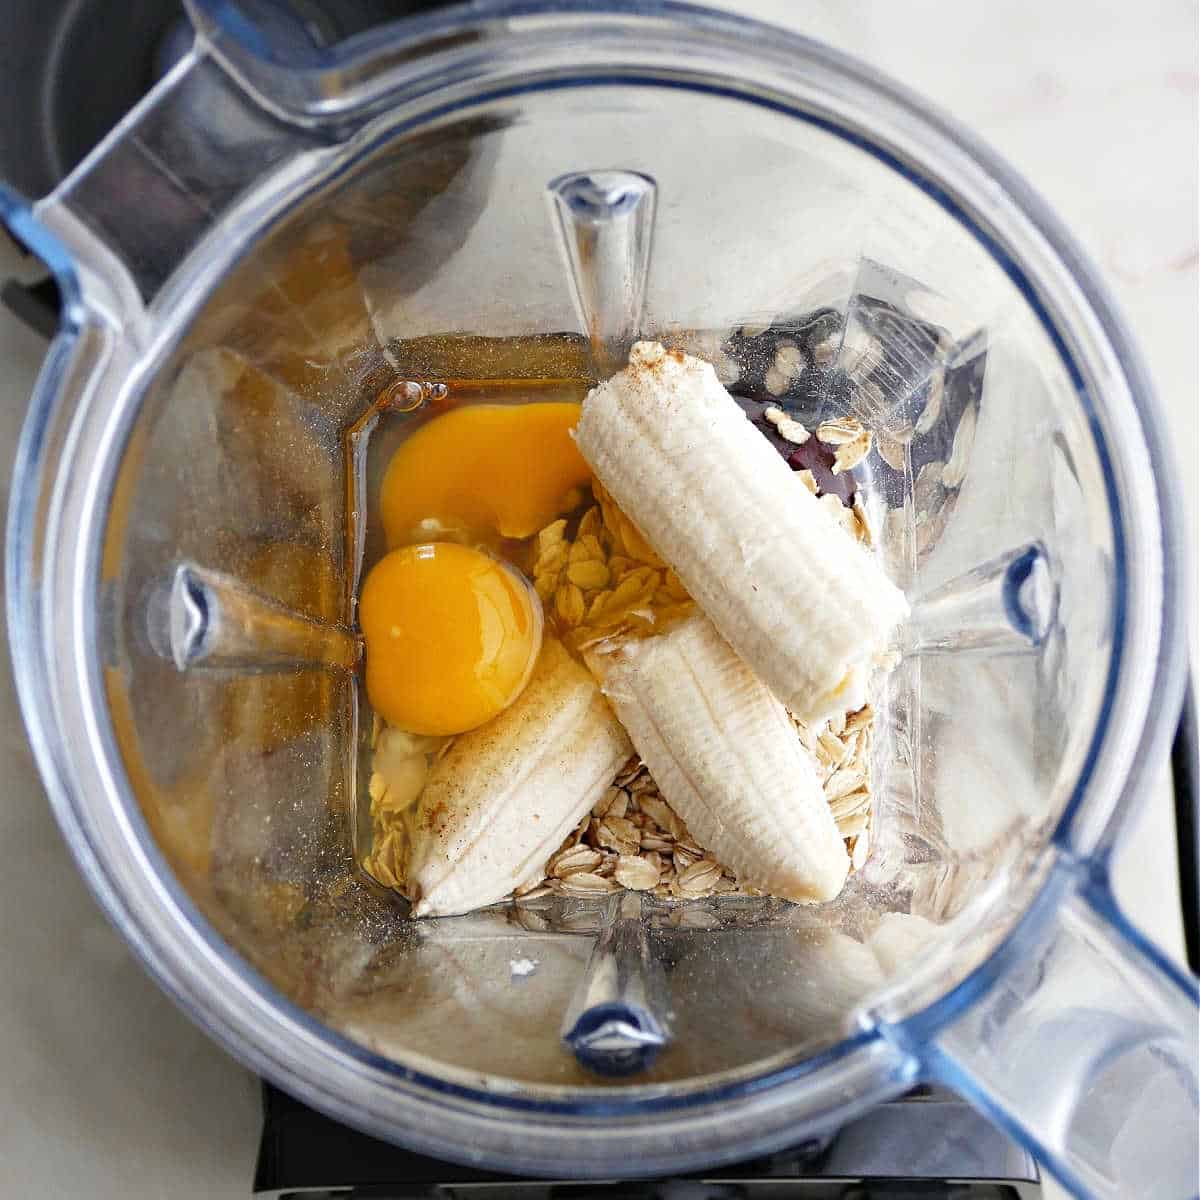 banana, eggs, roasted beets, and oats in a blender